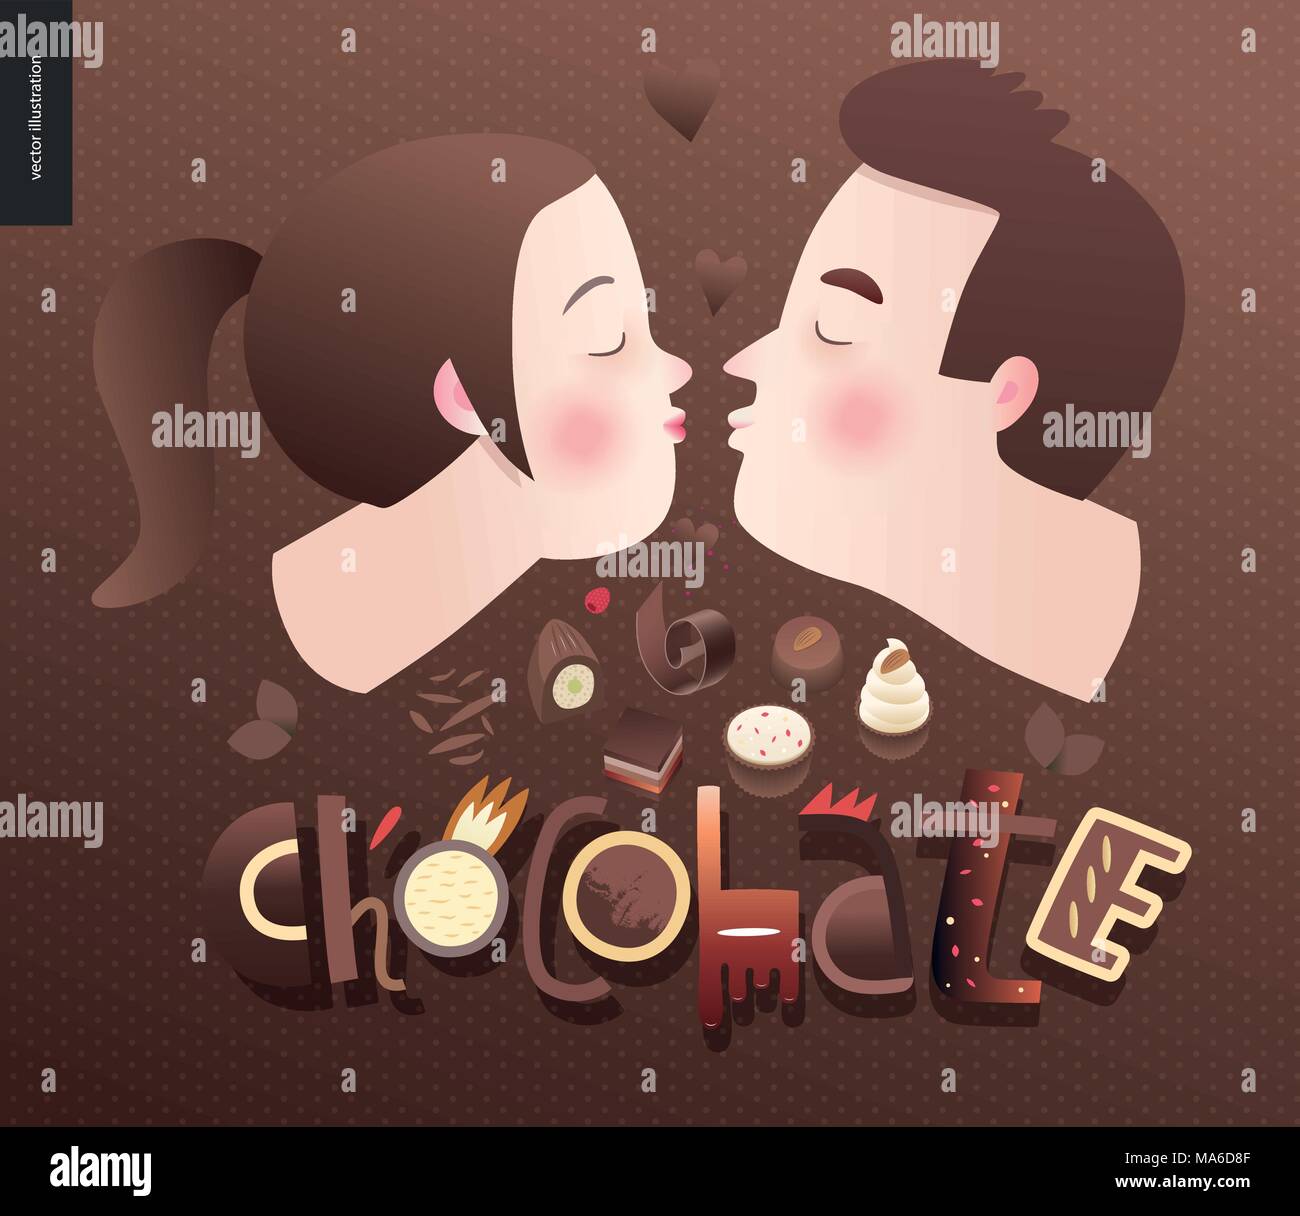 Love spring chocolate slogan - lettering composition and a kissing ...